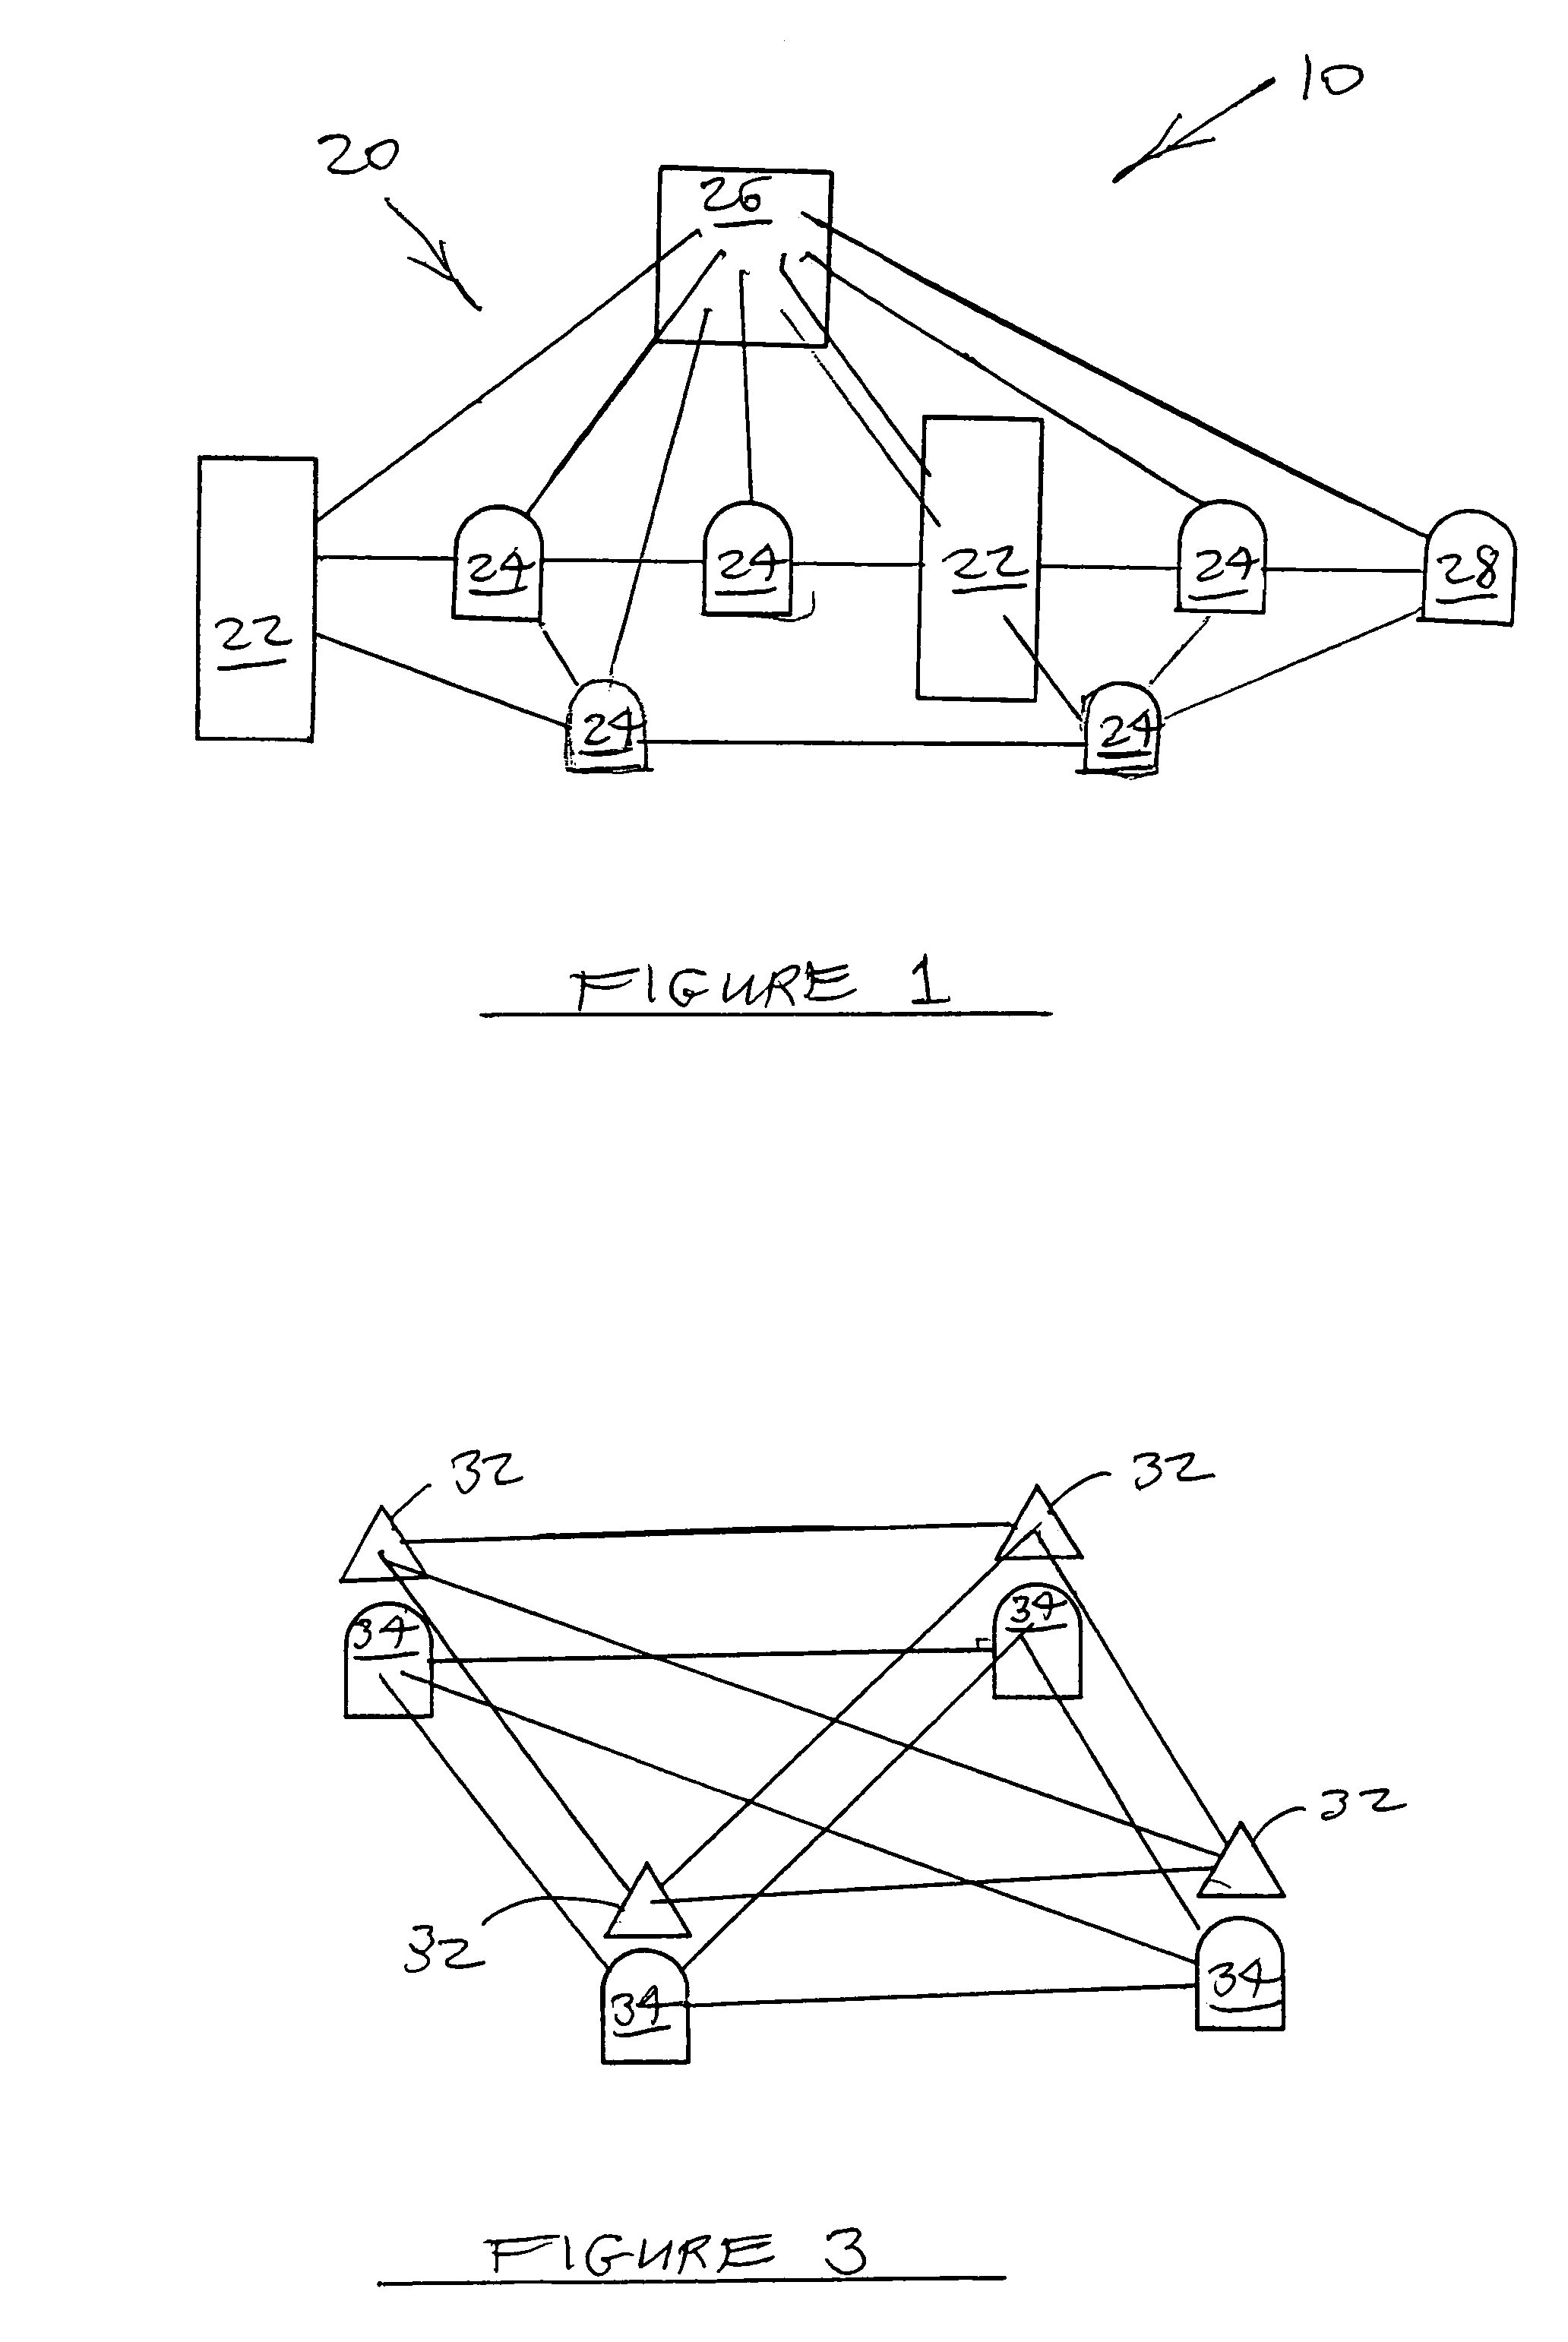 Continuous optimization and strategy execution computer network system and method